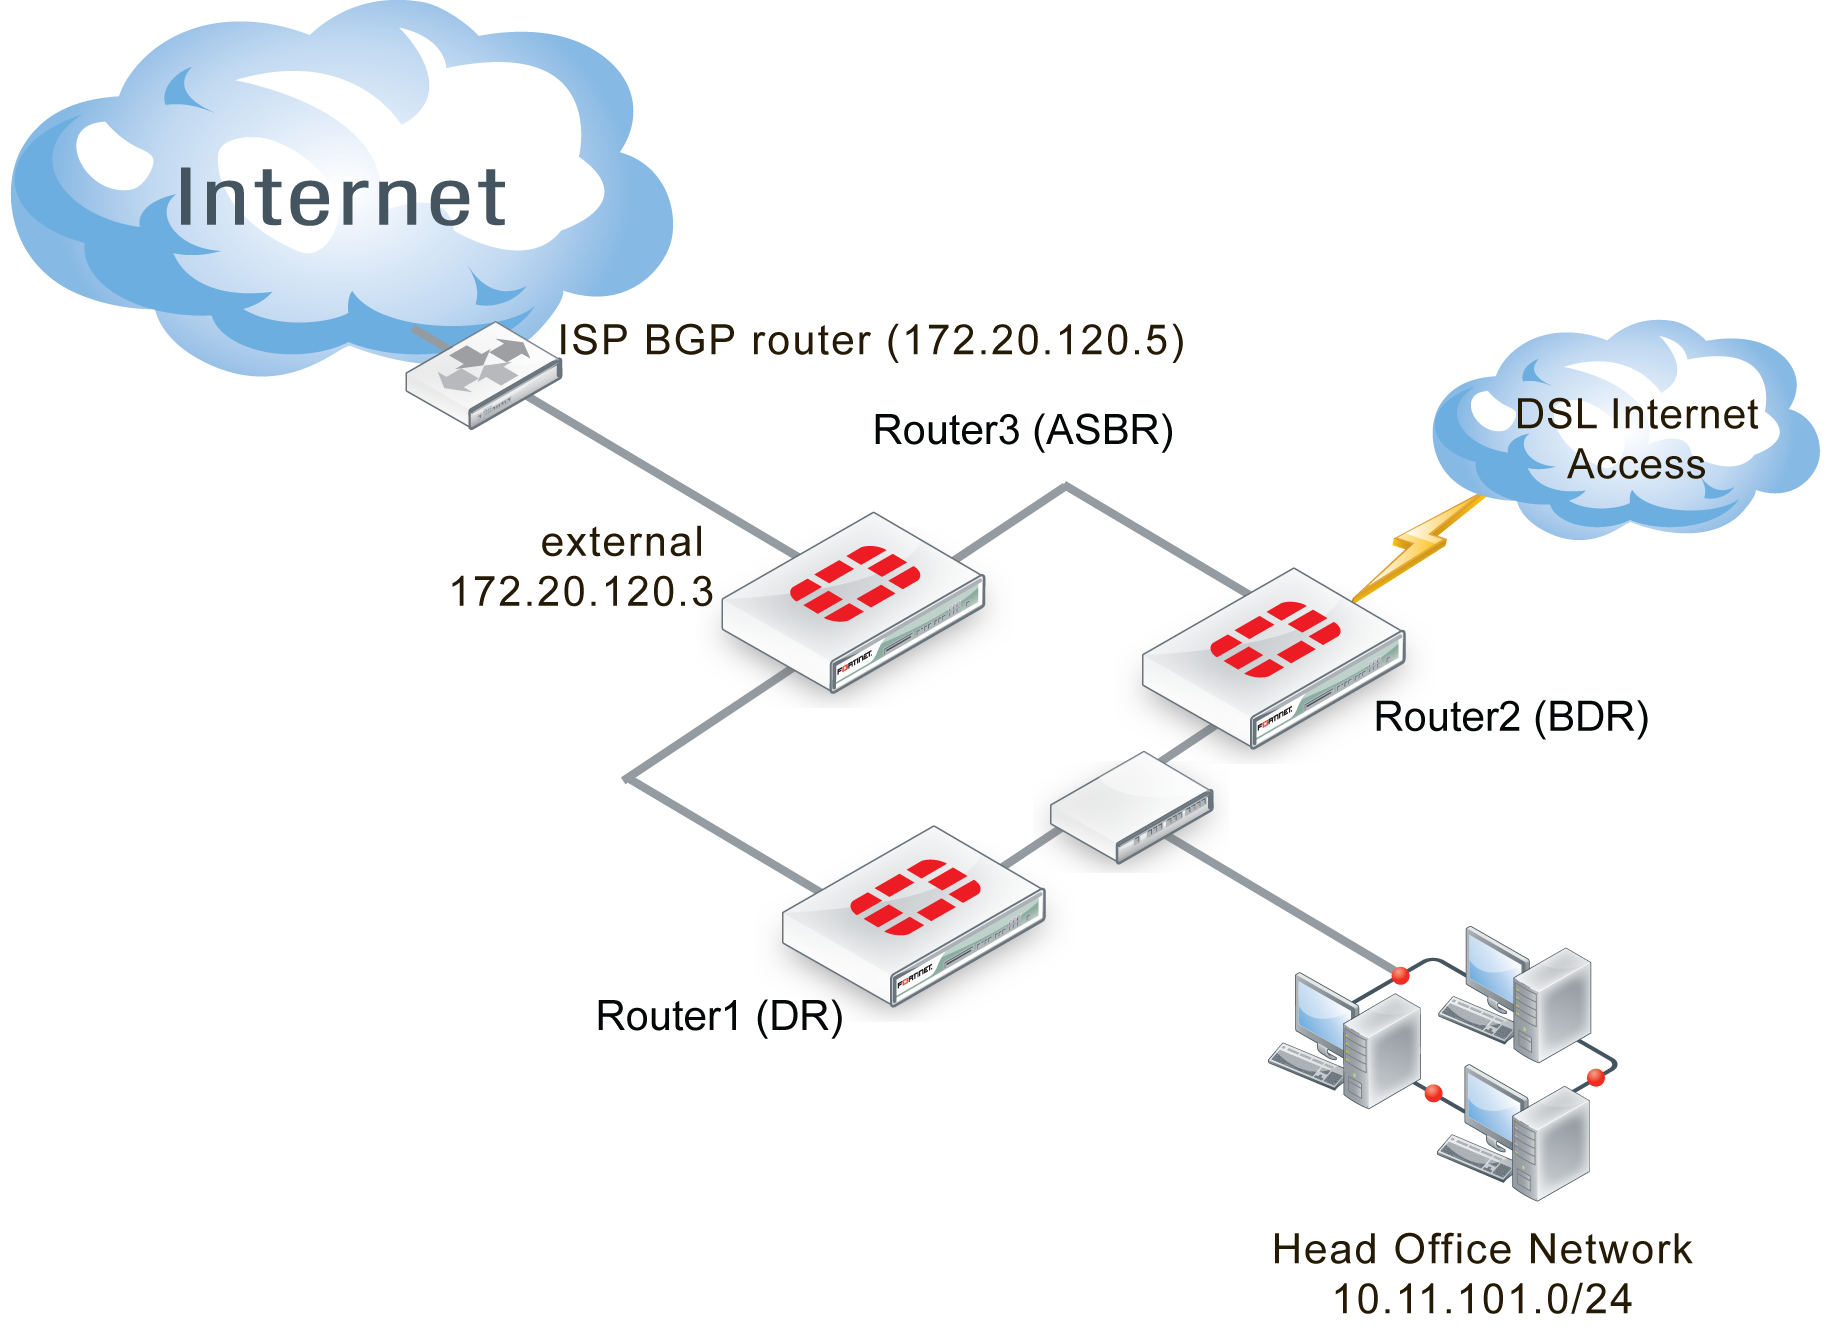 fortinet firewall features